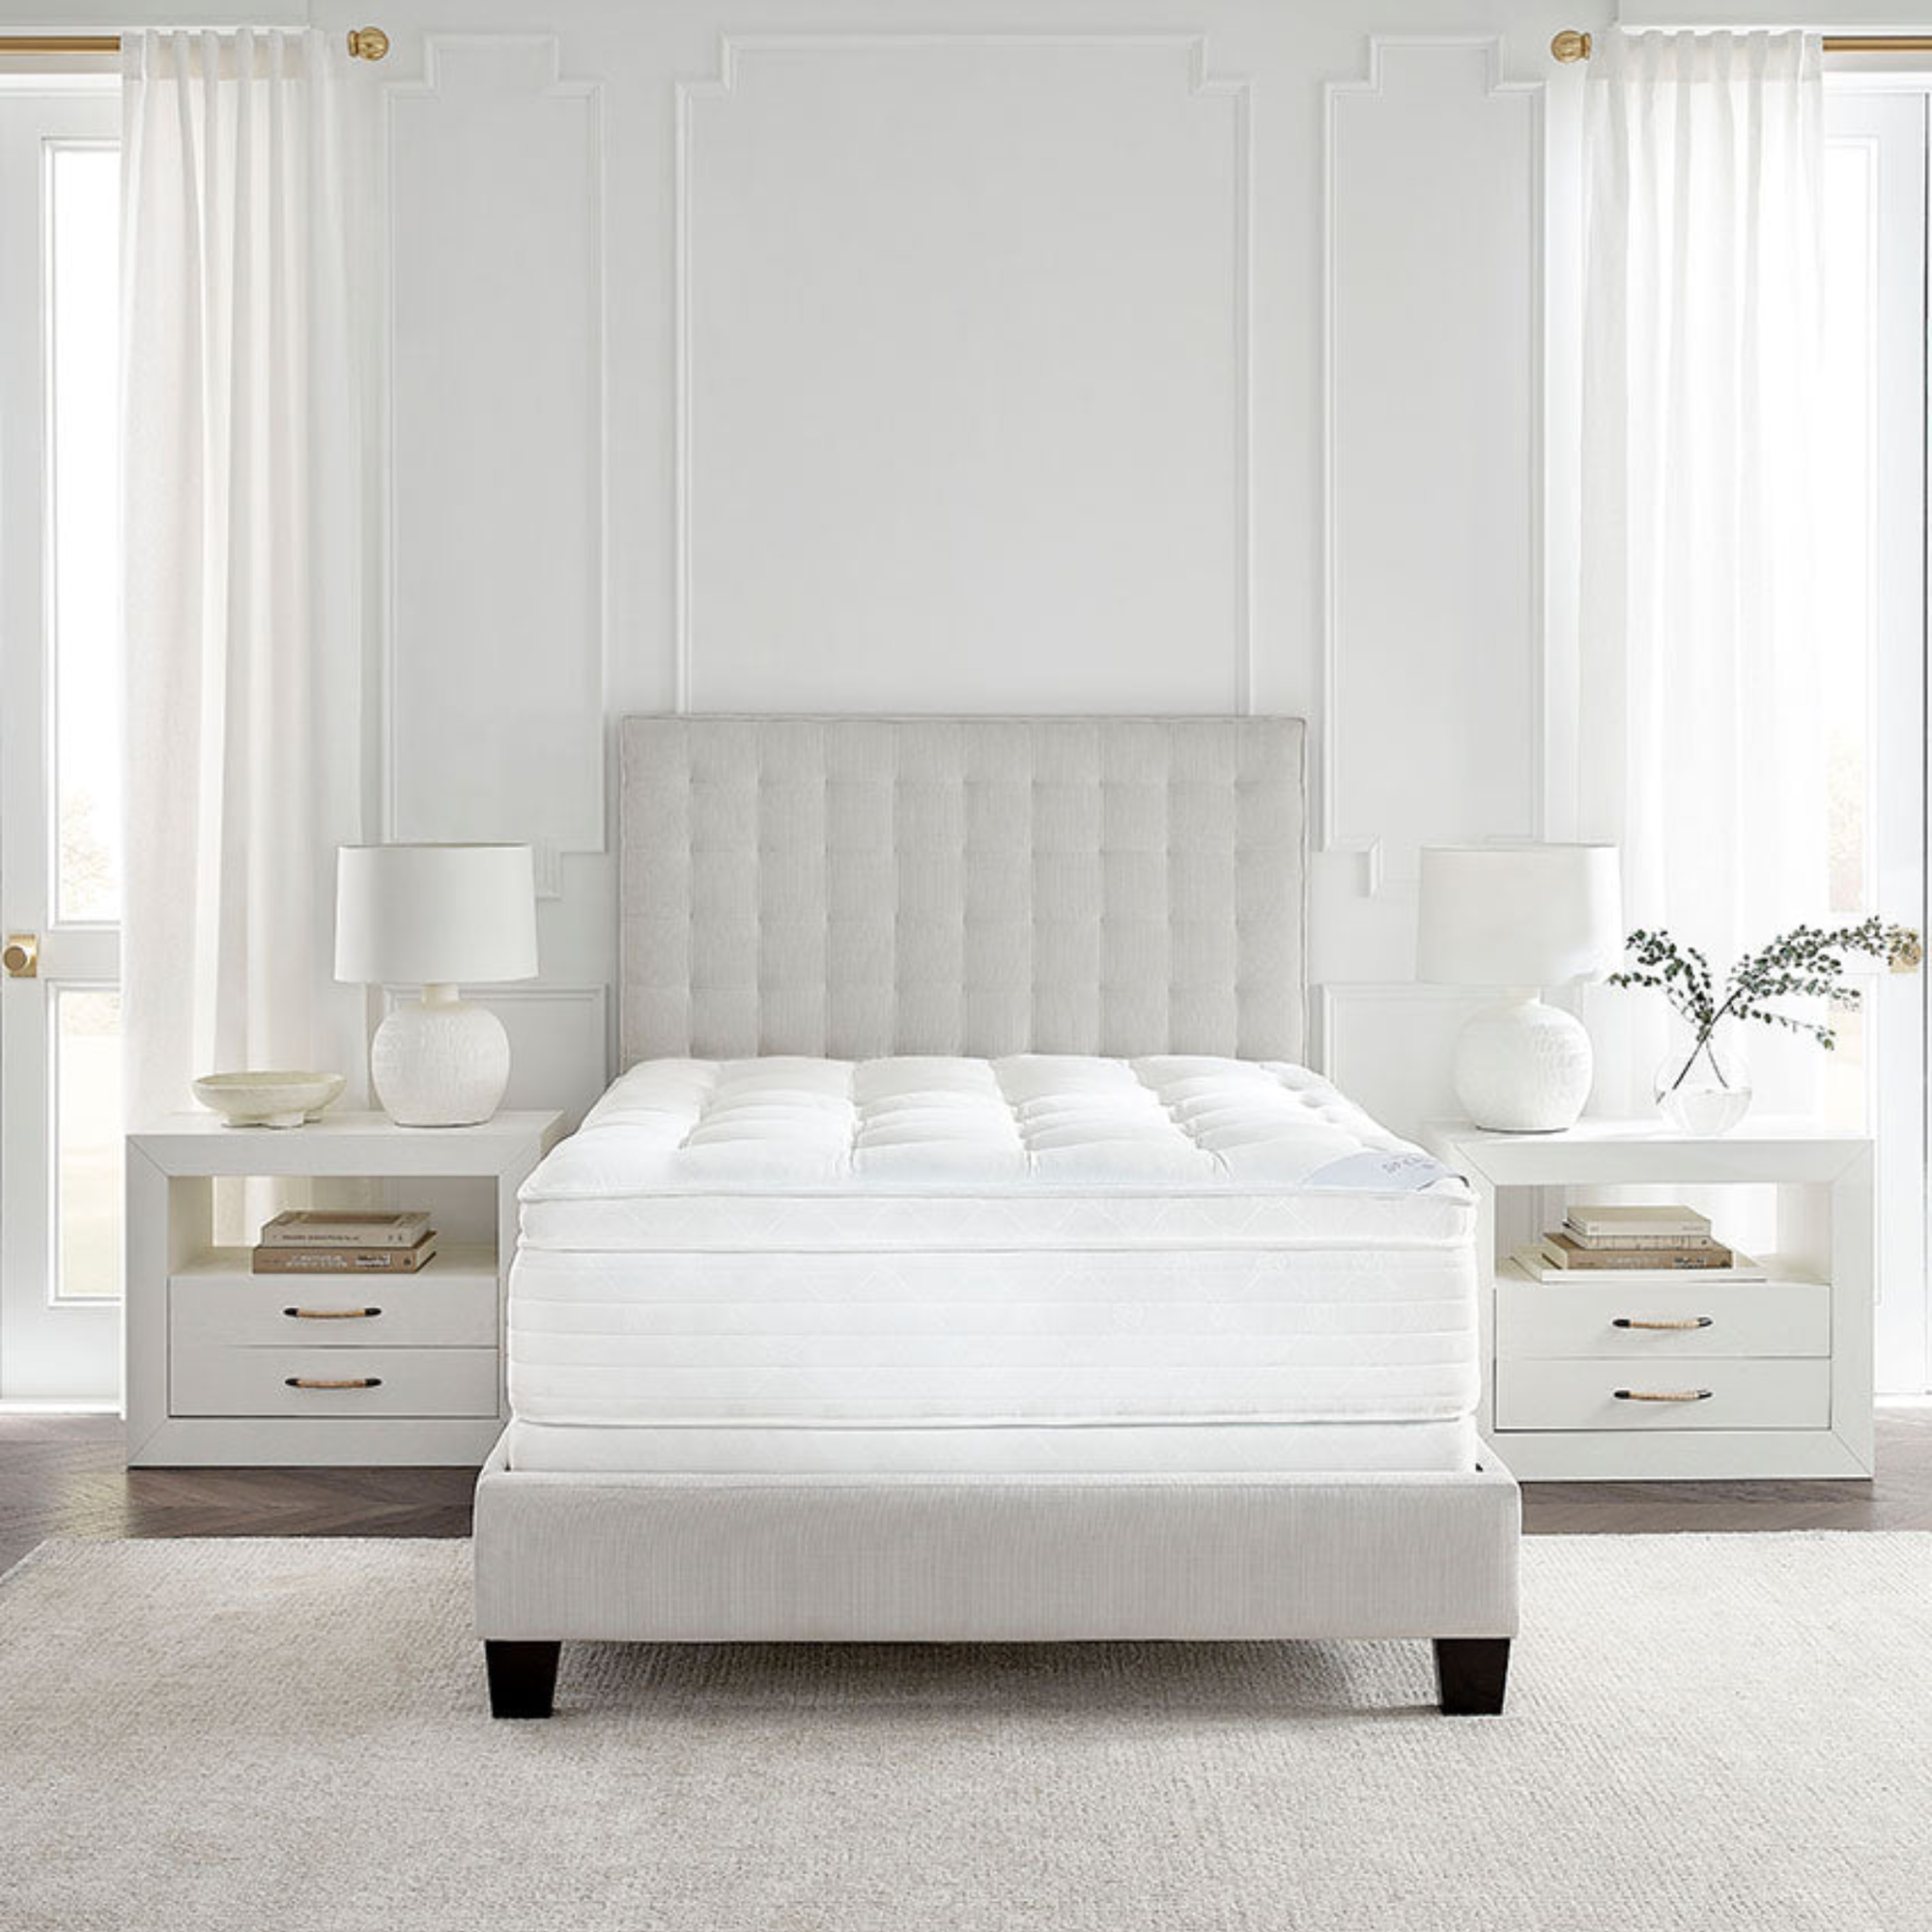 Lifestyle Shot of Sferra Nuvole Pillow Top Mattress in a well lit Room